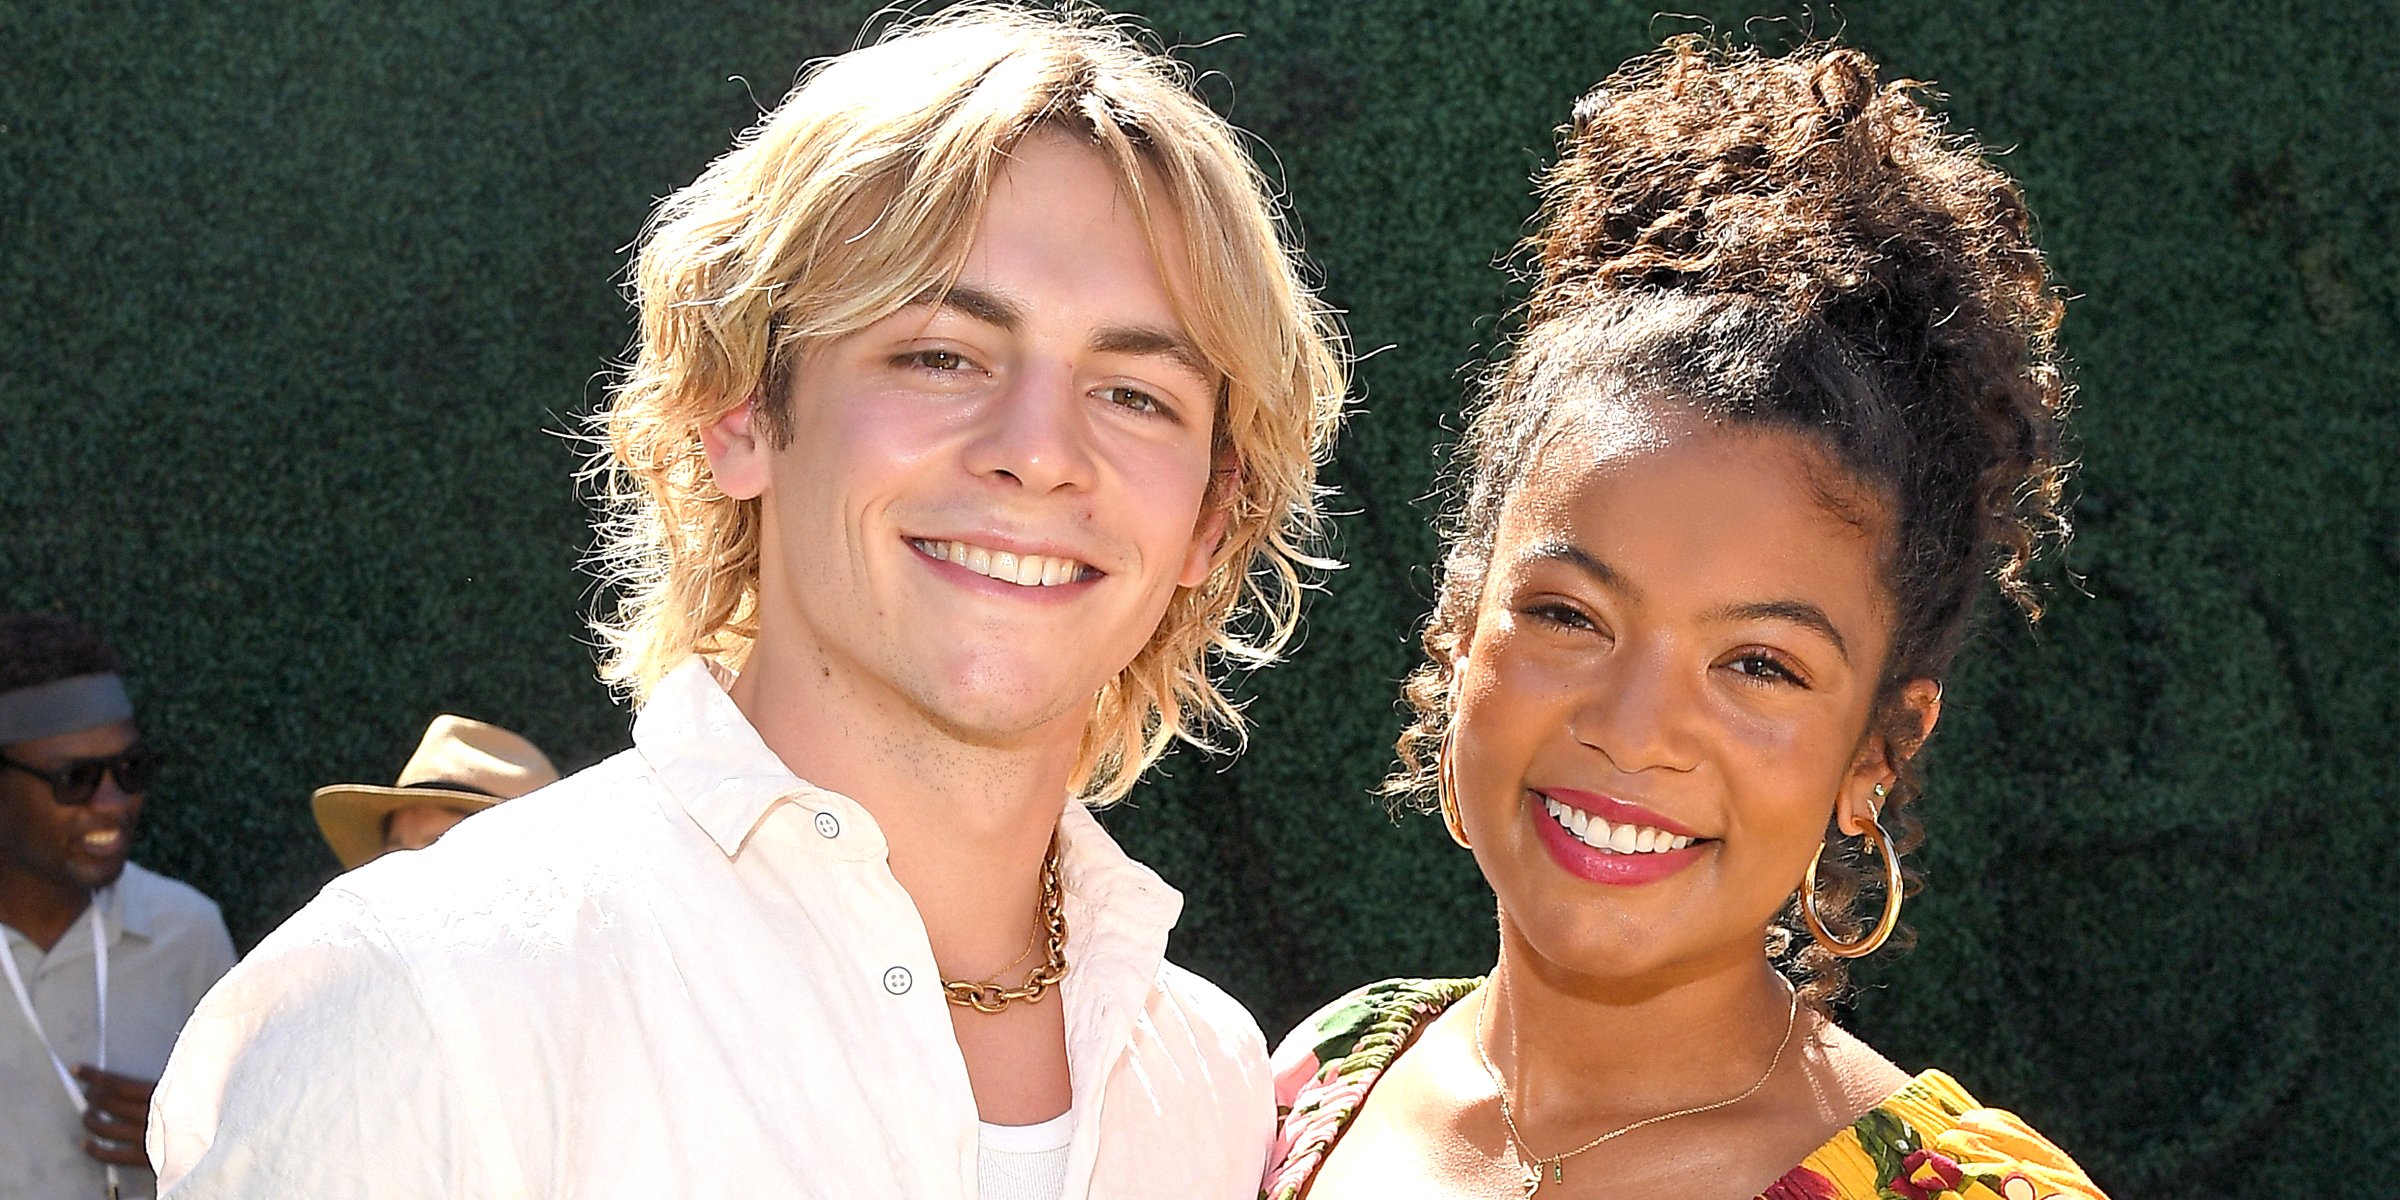 Ross Lynch and Jaz Sinclair | Source: Getty Images